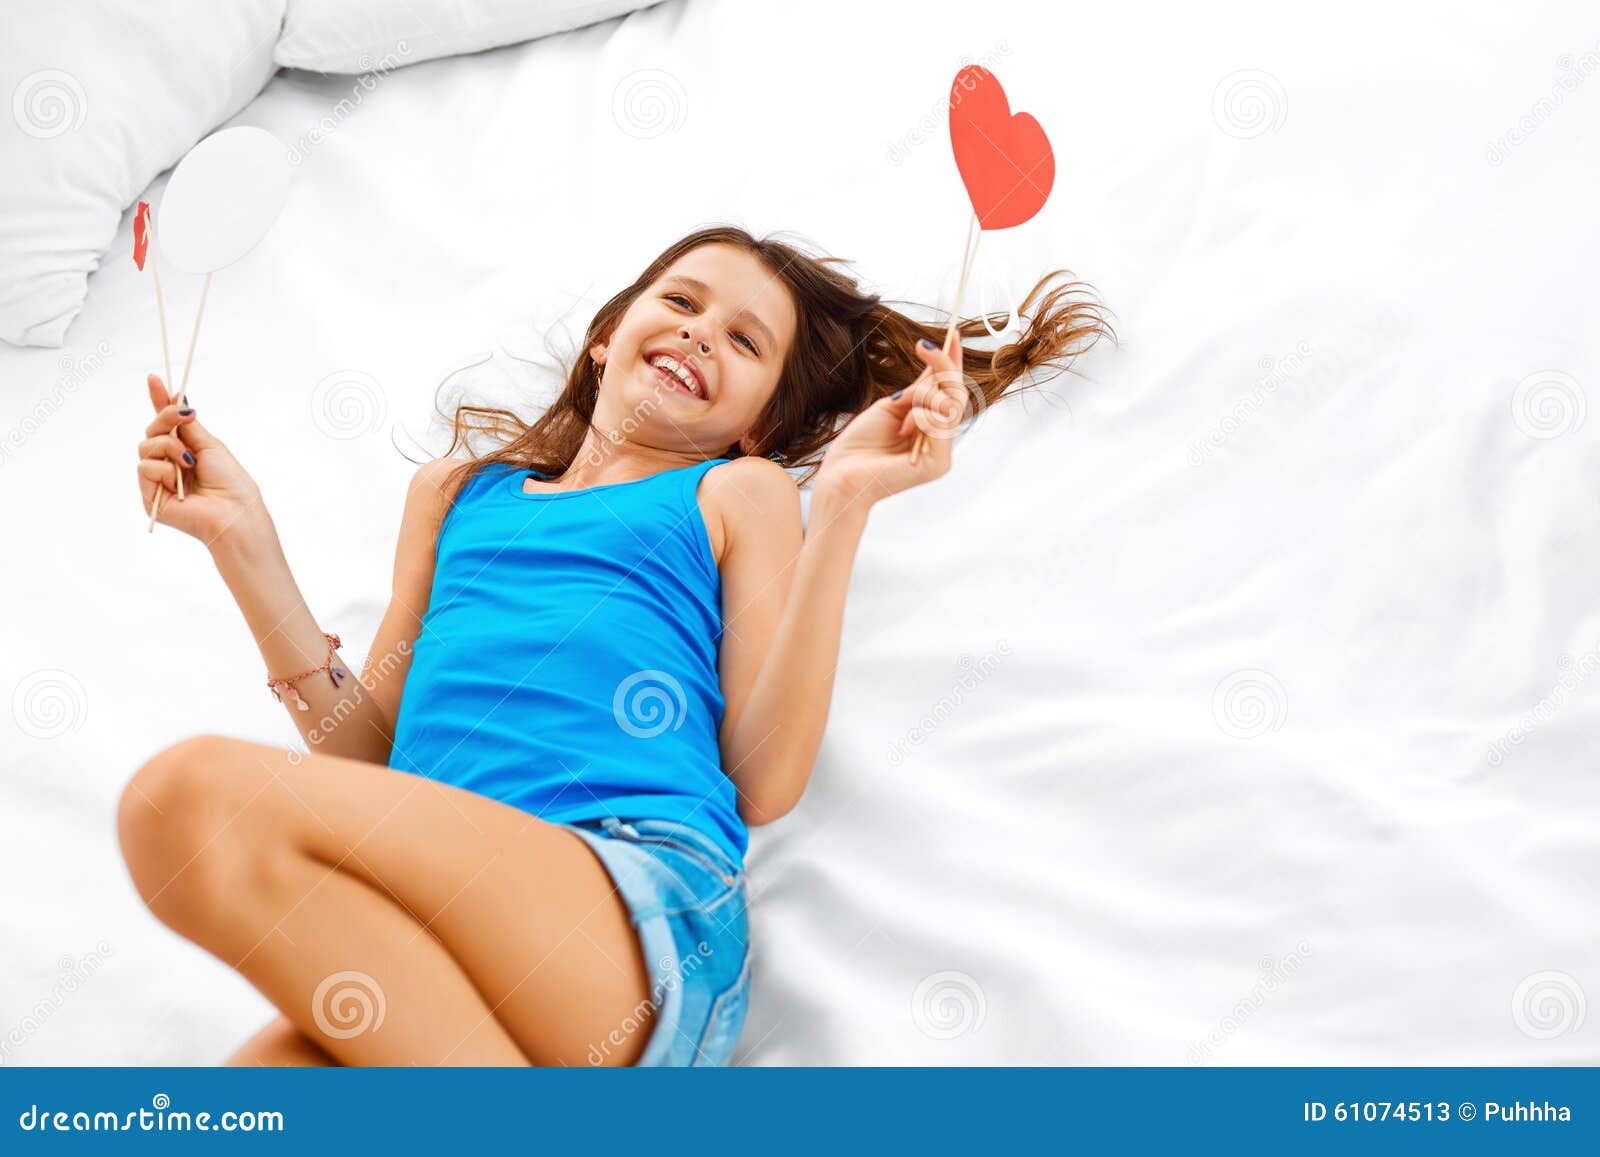 Teenage Girl Dreaming About Love Stock Image Image Of Relaxing Concept 61074513 